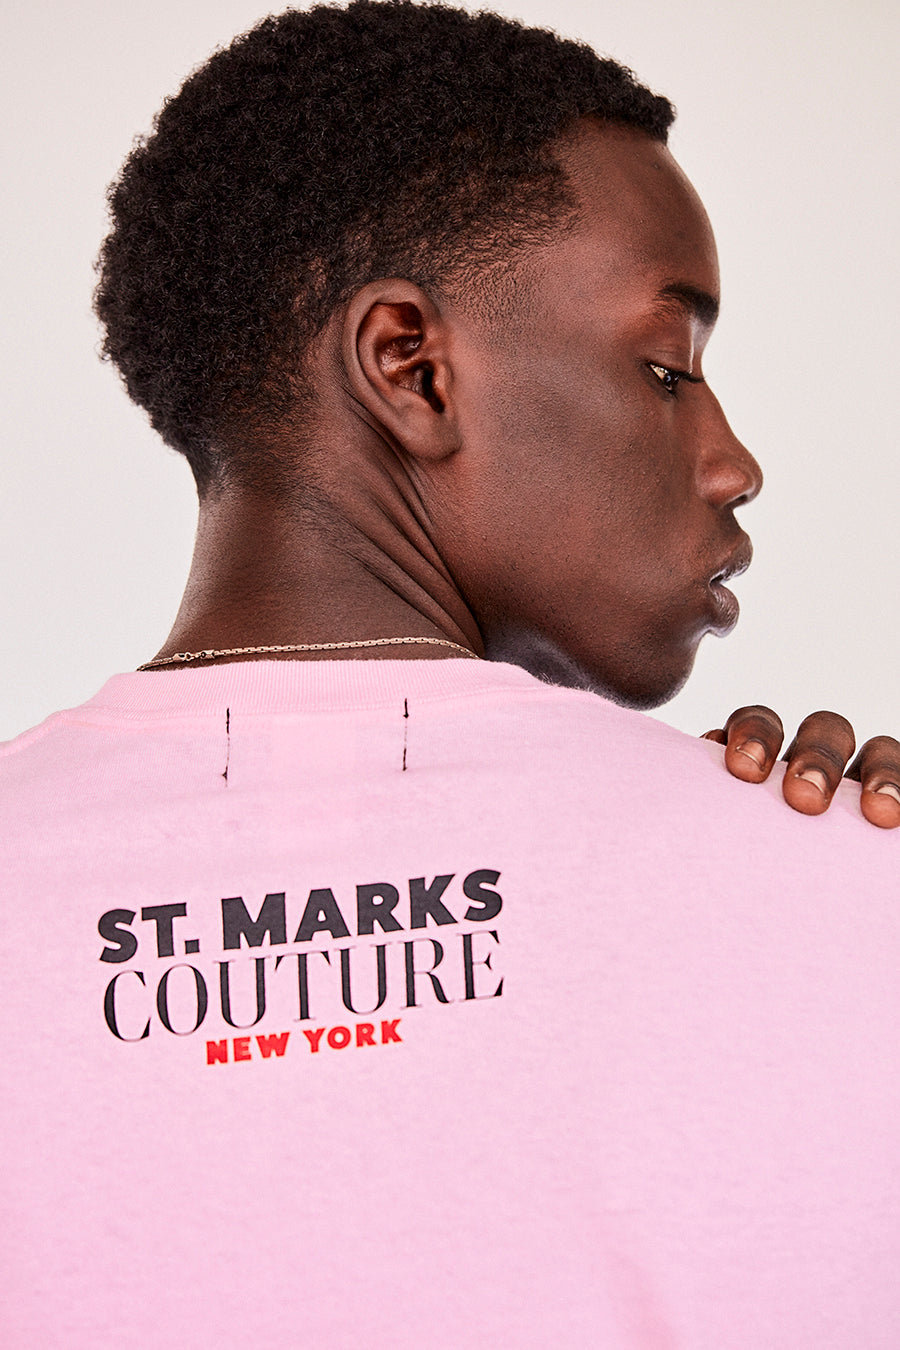 Brand New. Pride Month 2020- New York Label: Your new work from home outfit Shop the Dont Walk Vogue pale pink T-Shirt featuring chest embroidery inspired by old school Walk/Dont Walk crosswalk signs on the front and St. Marks Couture New York logo on the back. Hand silkscreen printed in New York with love.